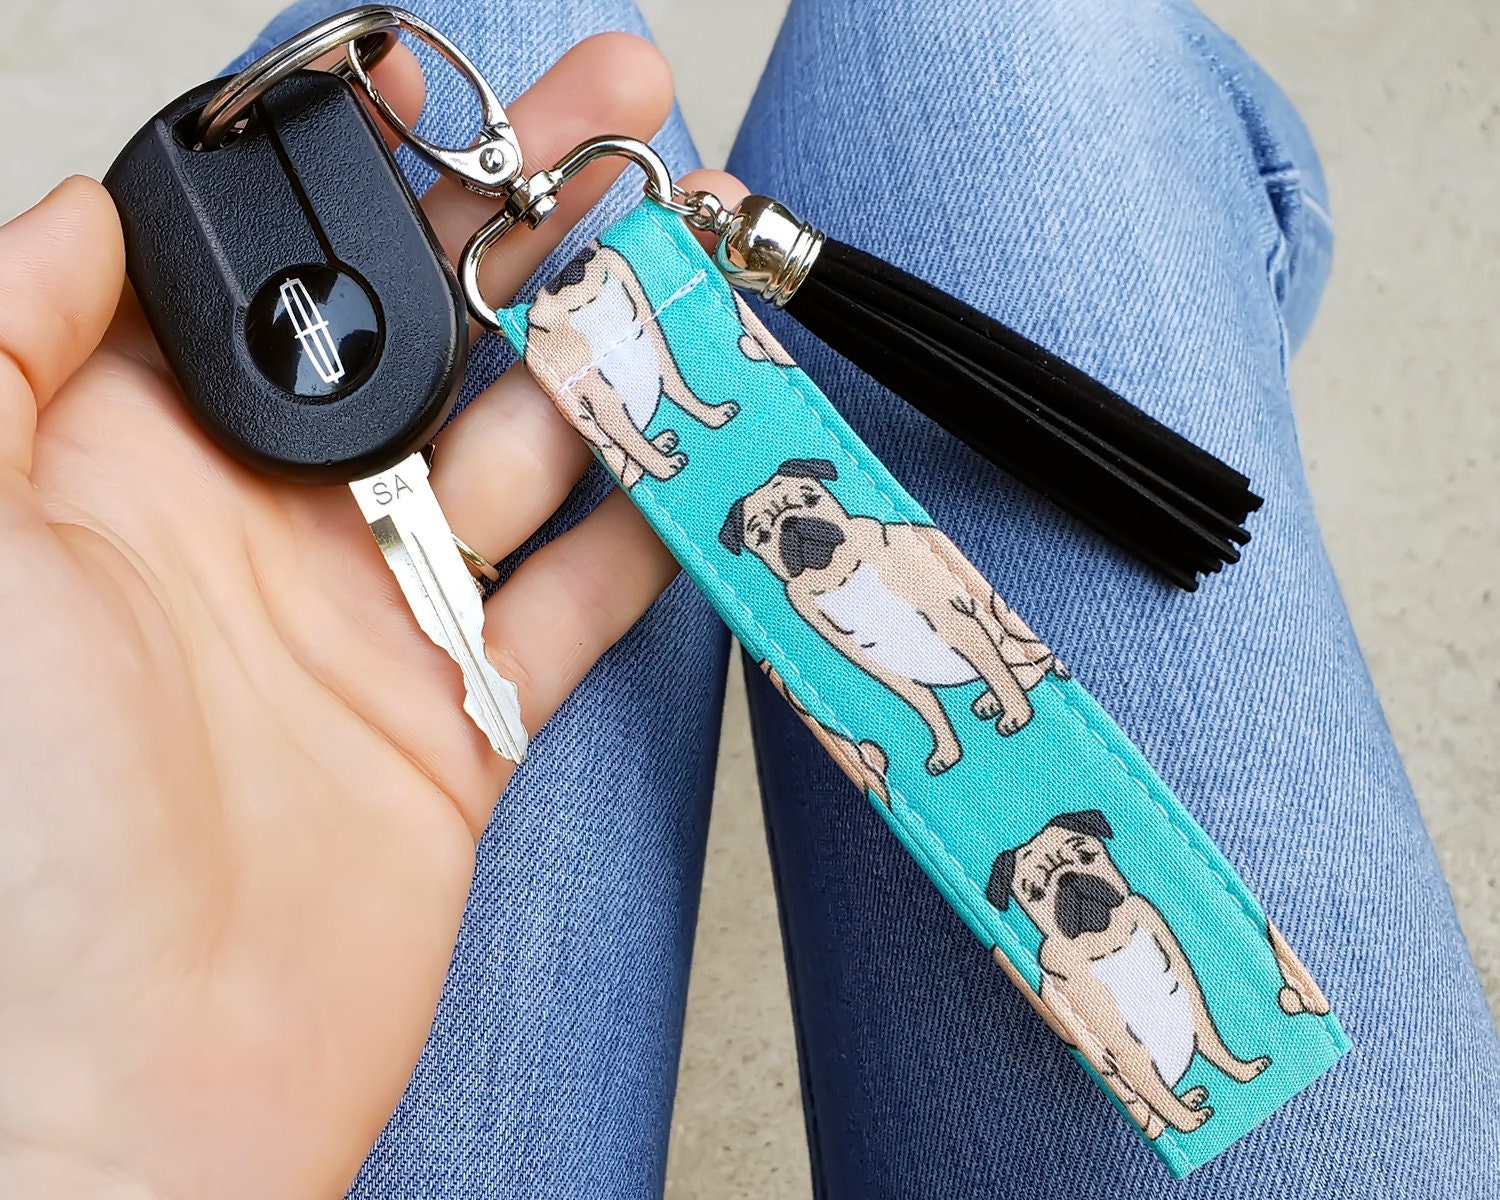 Wrapables Lanyard Keychain and ID Badge Holder, Gray Pug 